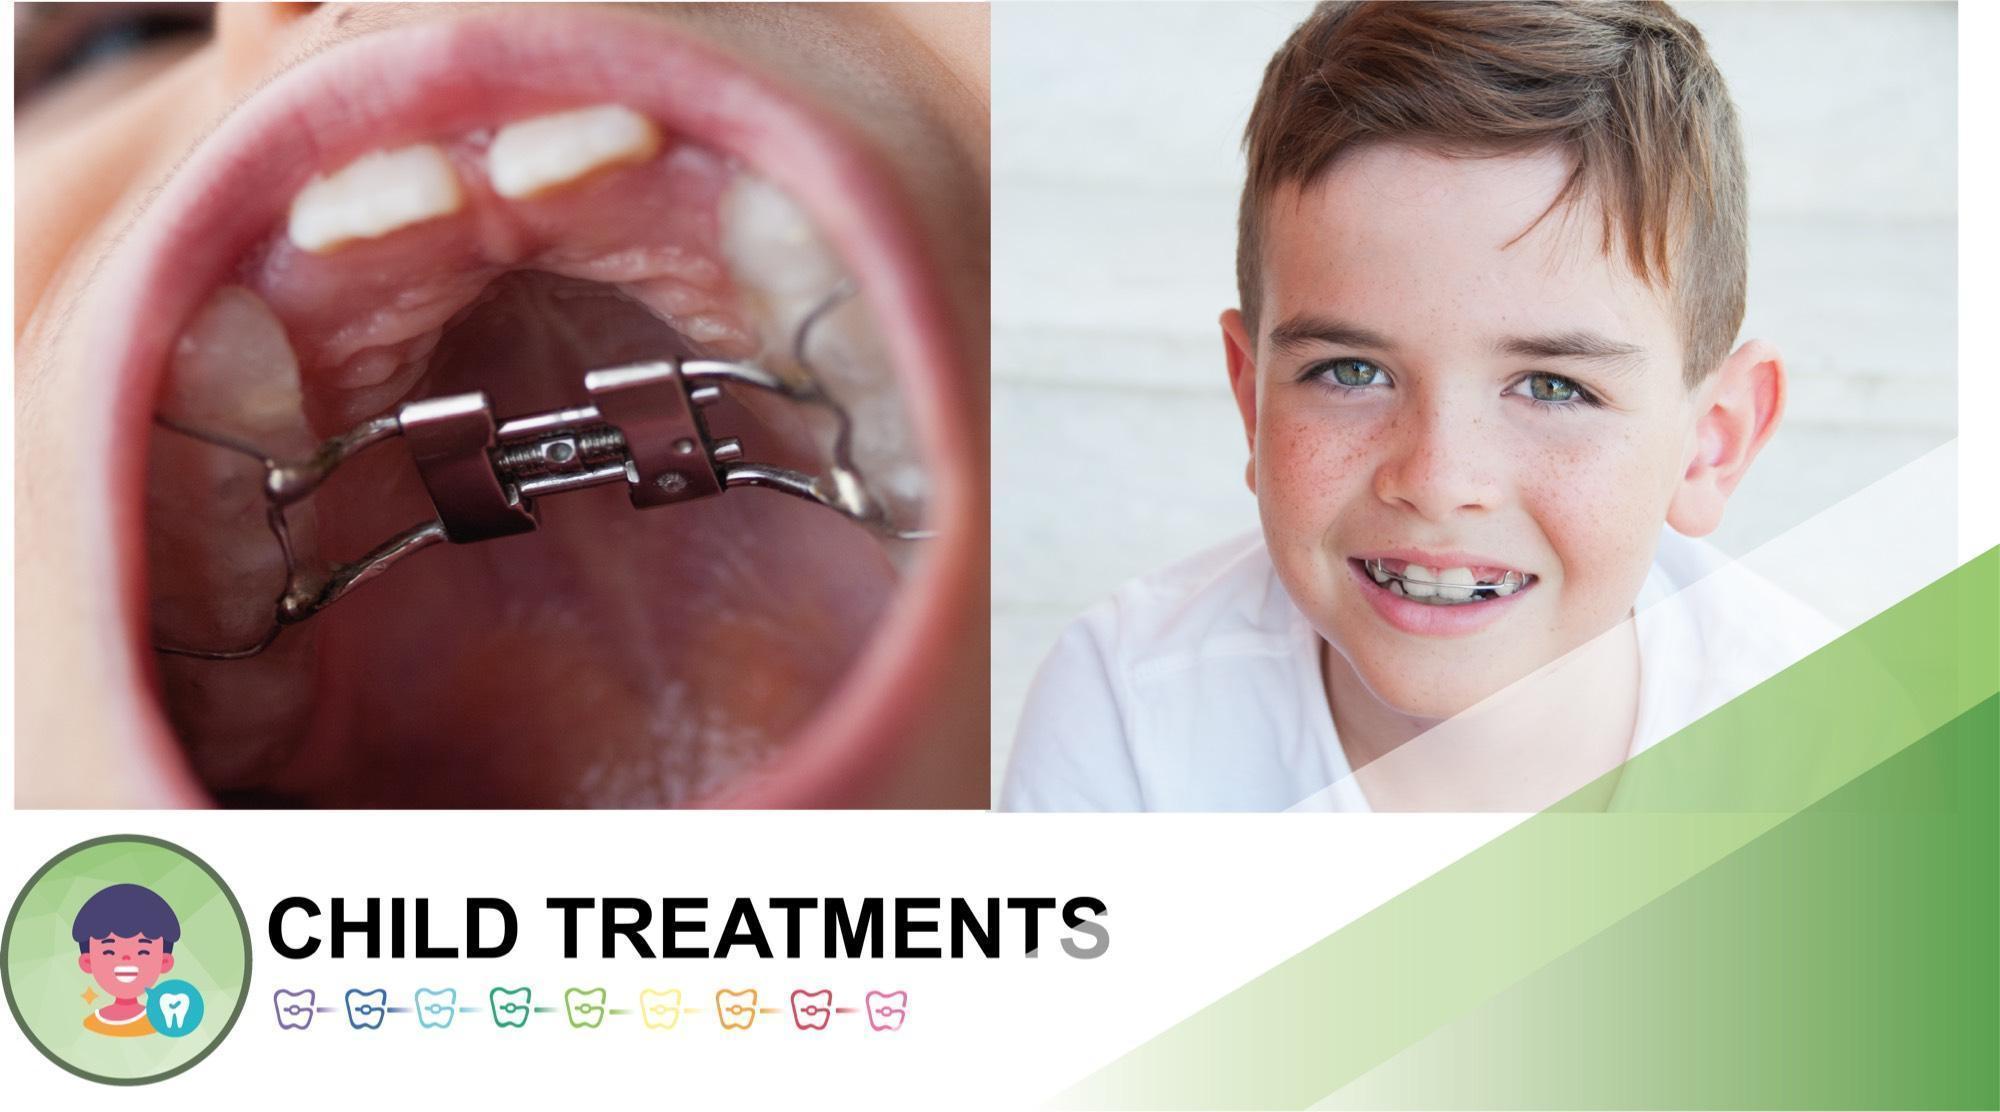 OrthoBoutique - a child smiling after child treatments